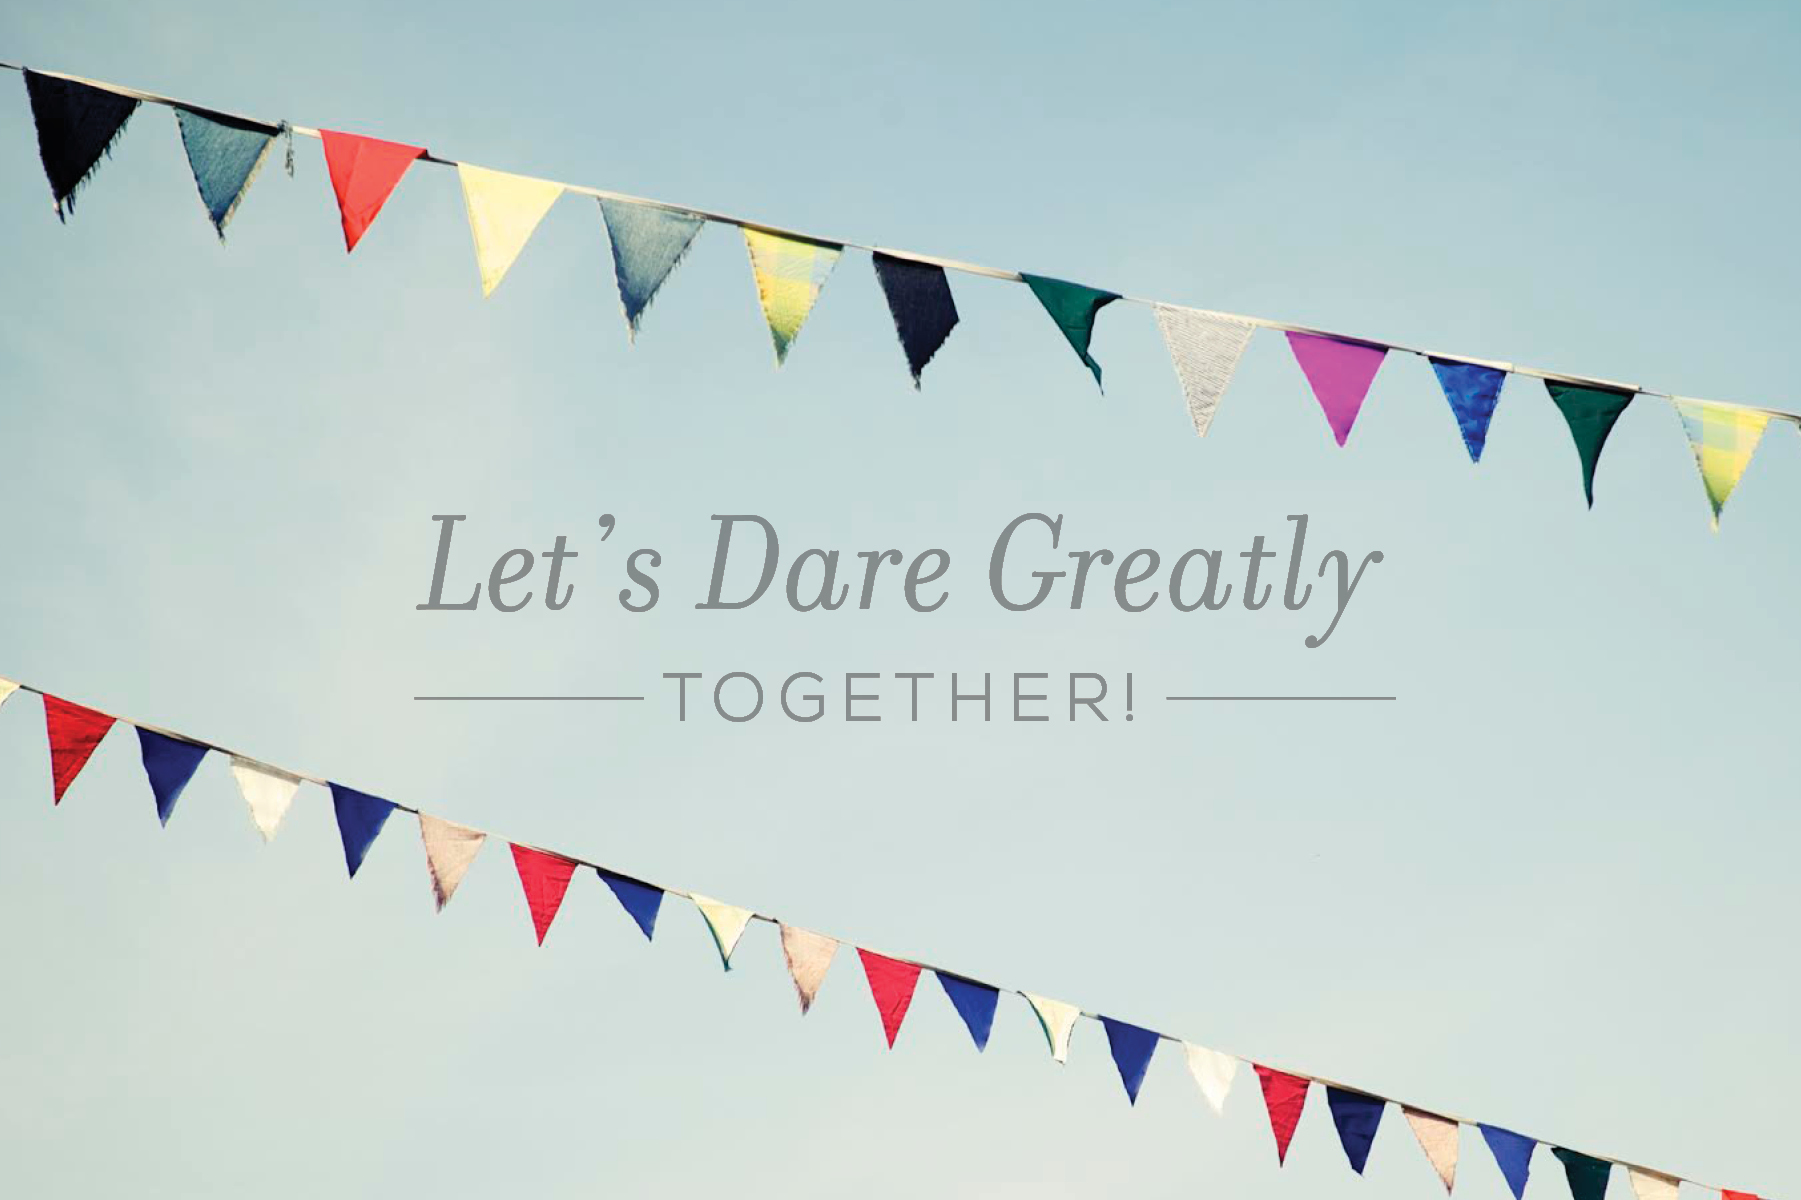 Daring Greatly - slide quote from Brene Brown